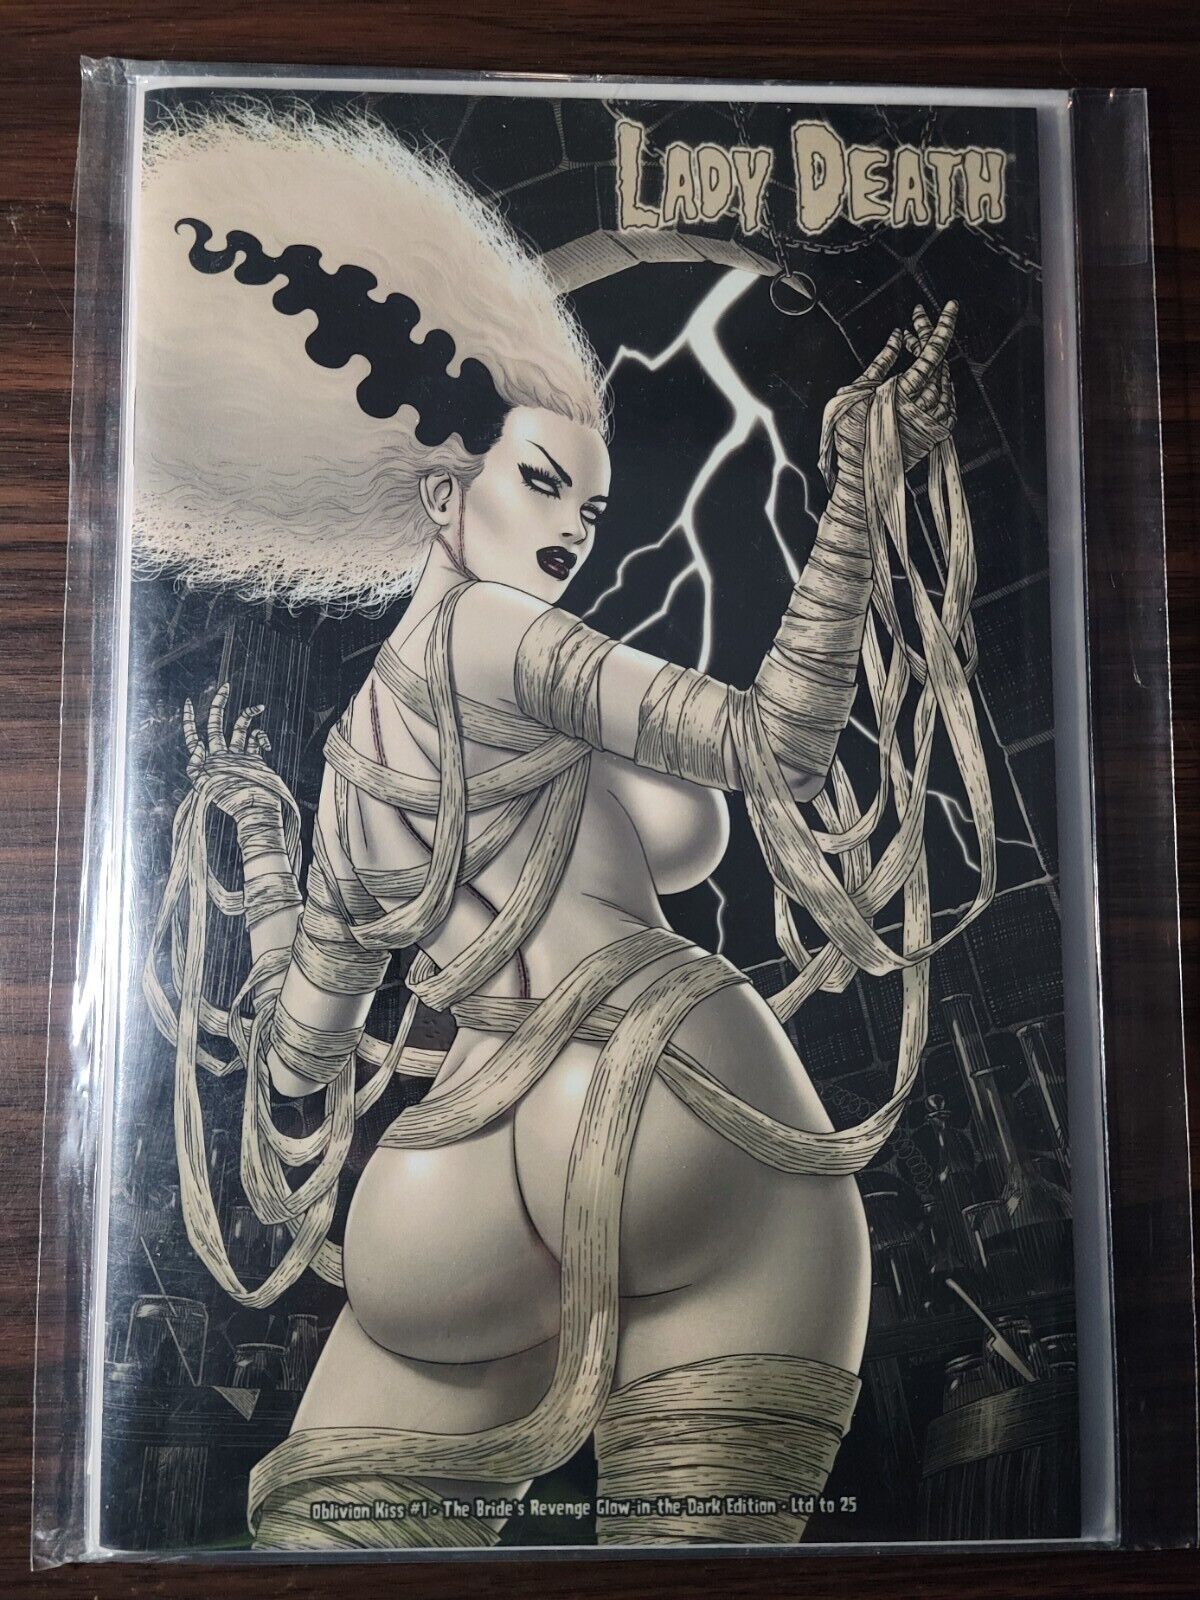 New Unopened LADY DEATH OBLIVION KISS #1 THE BRIDE\'S REVENGE GLOW IN THE DARK Ed